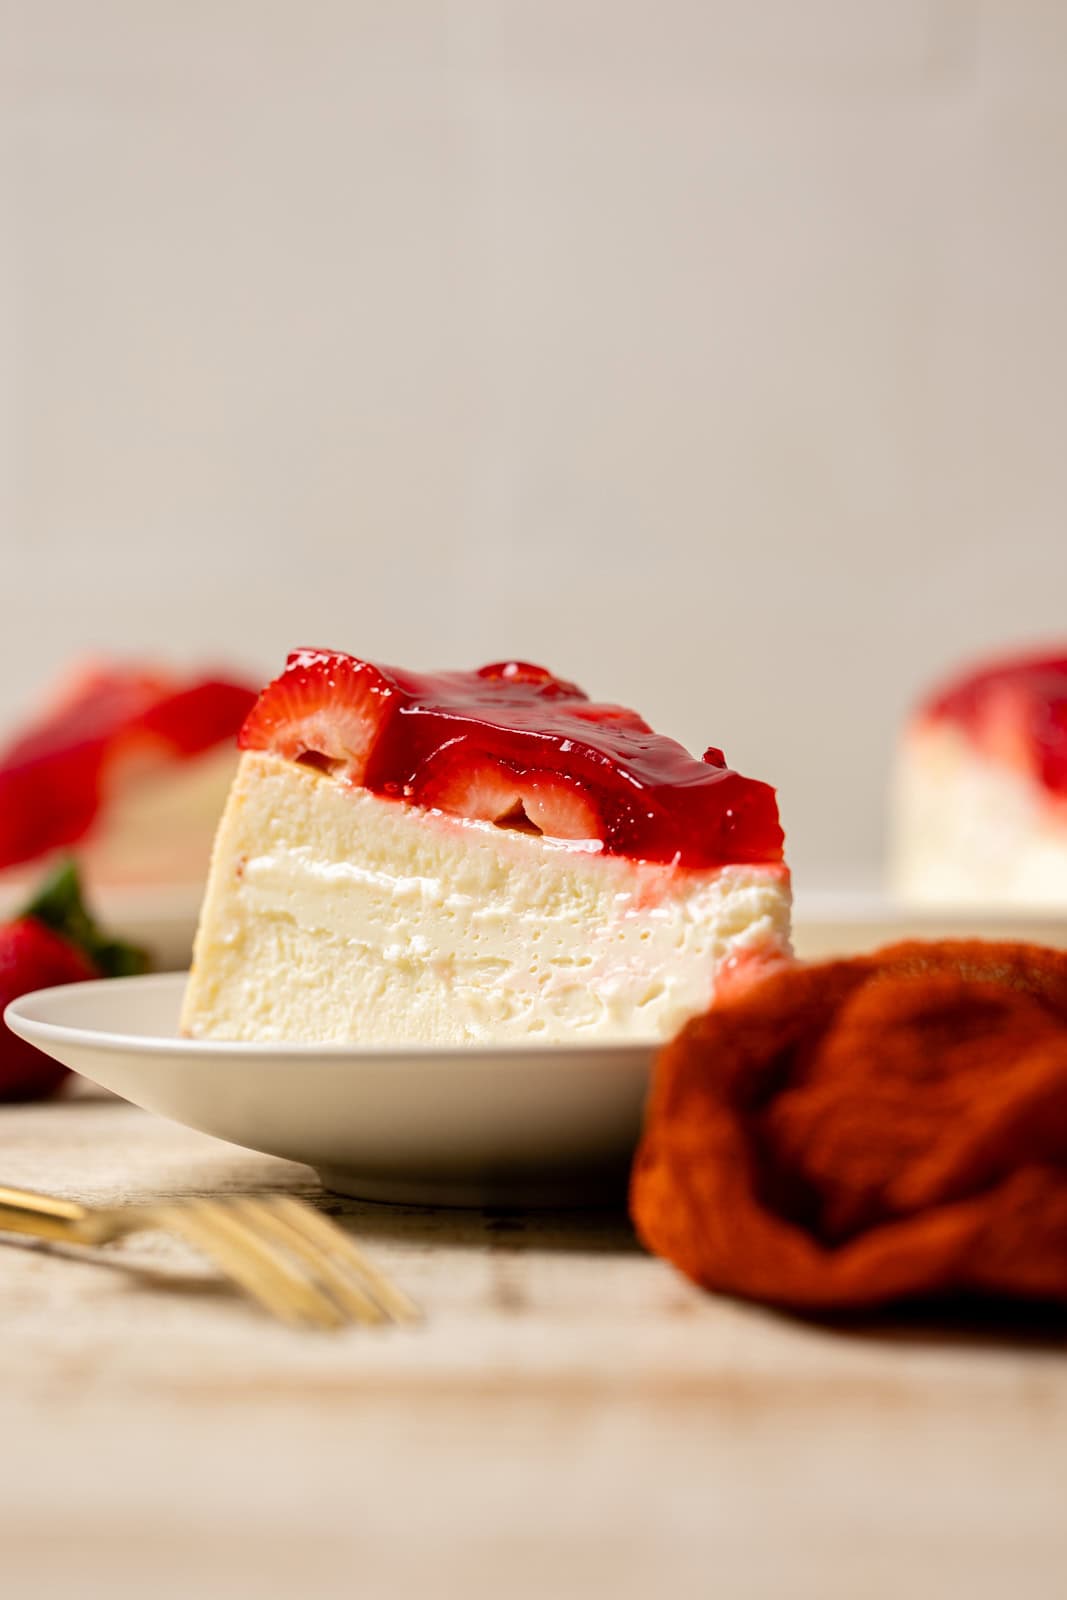 Strawberry cheesecake slices on a plate.